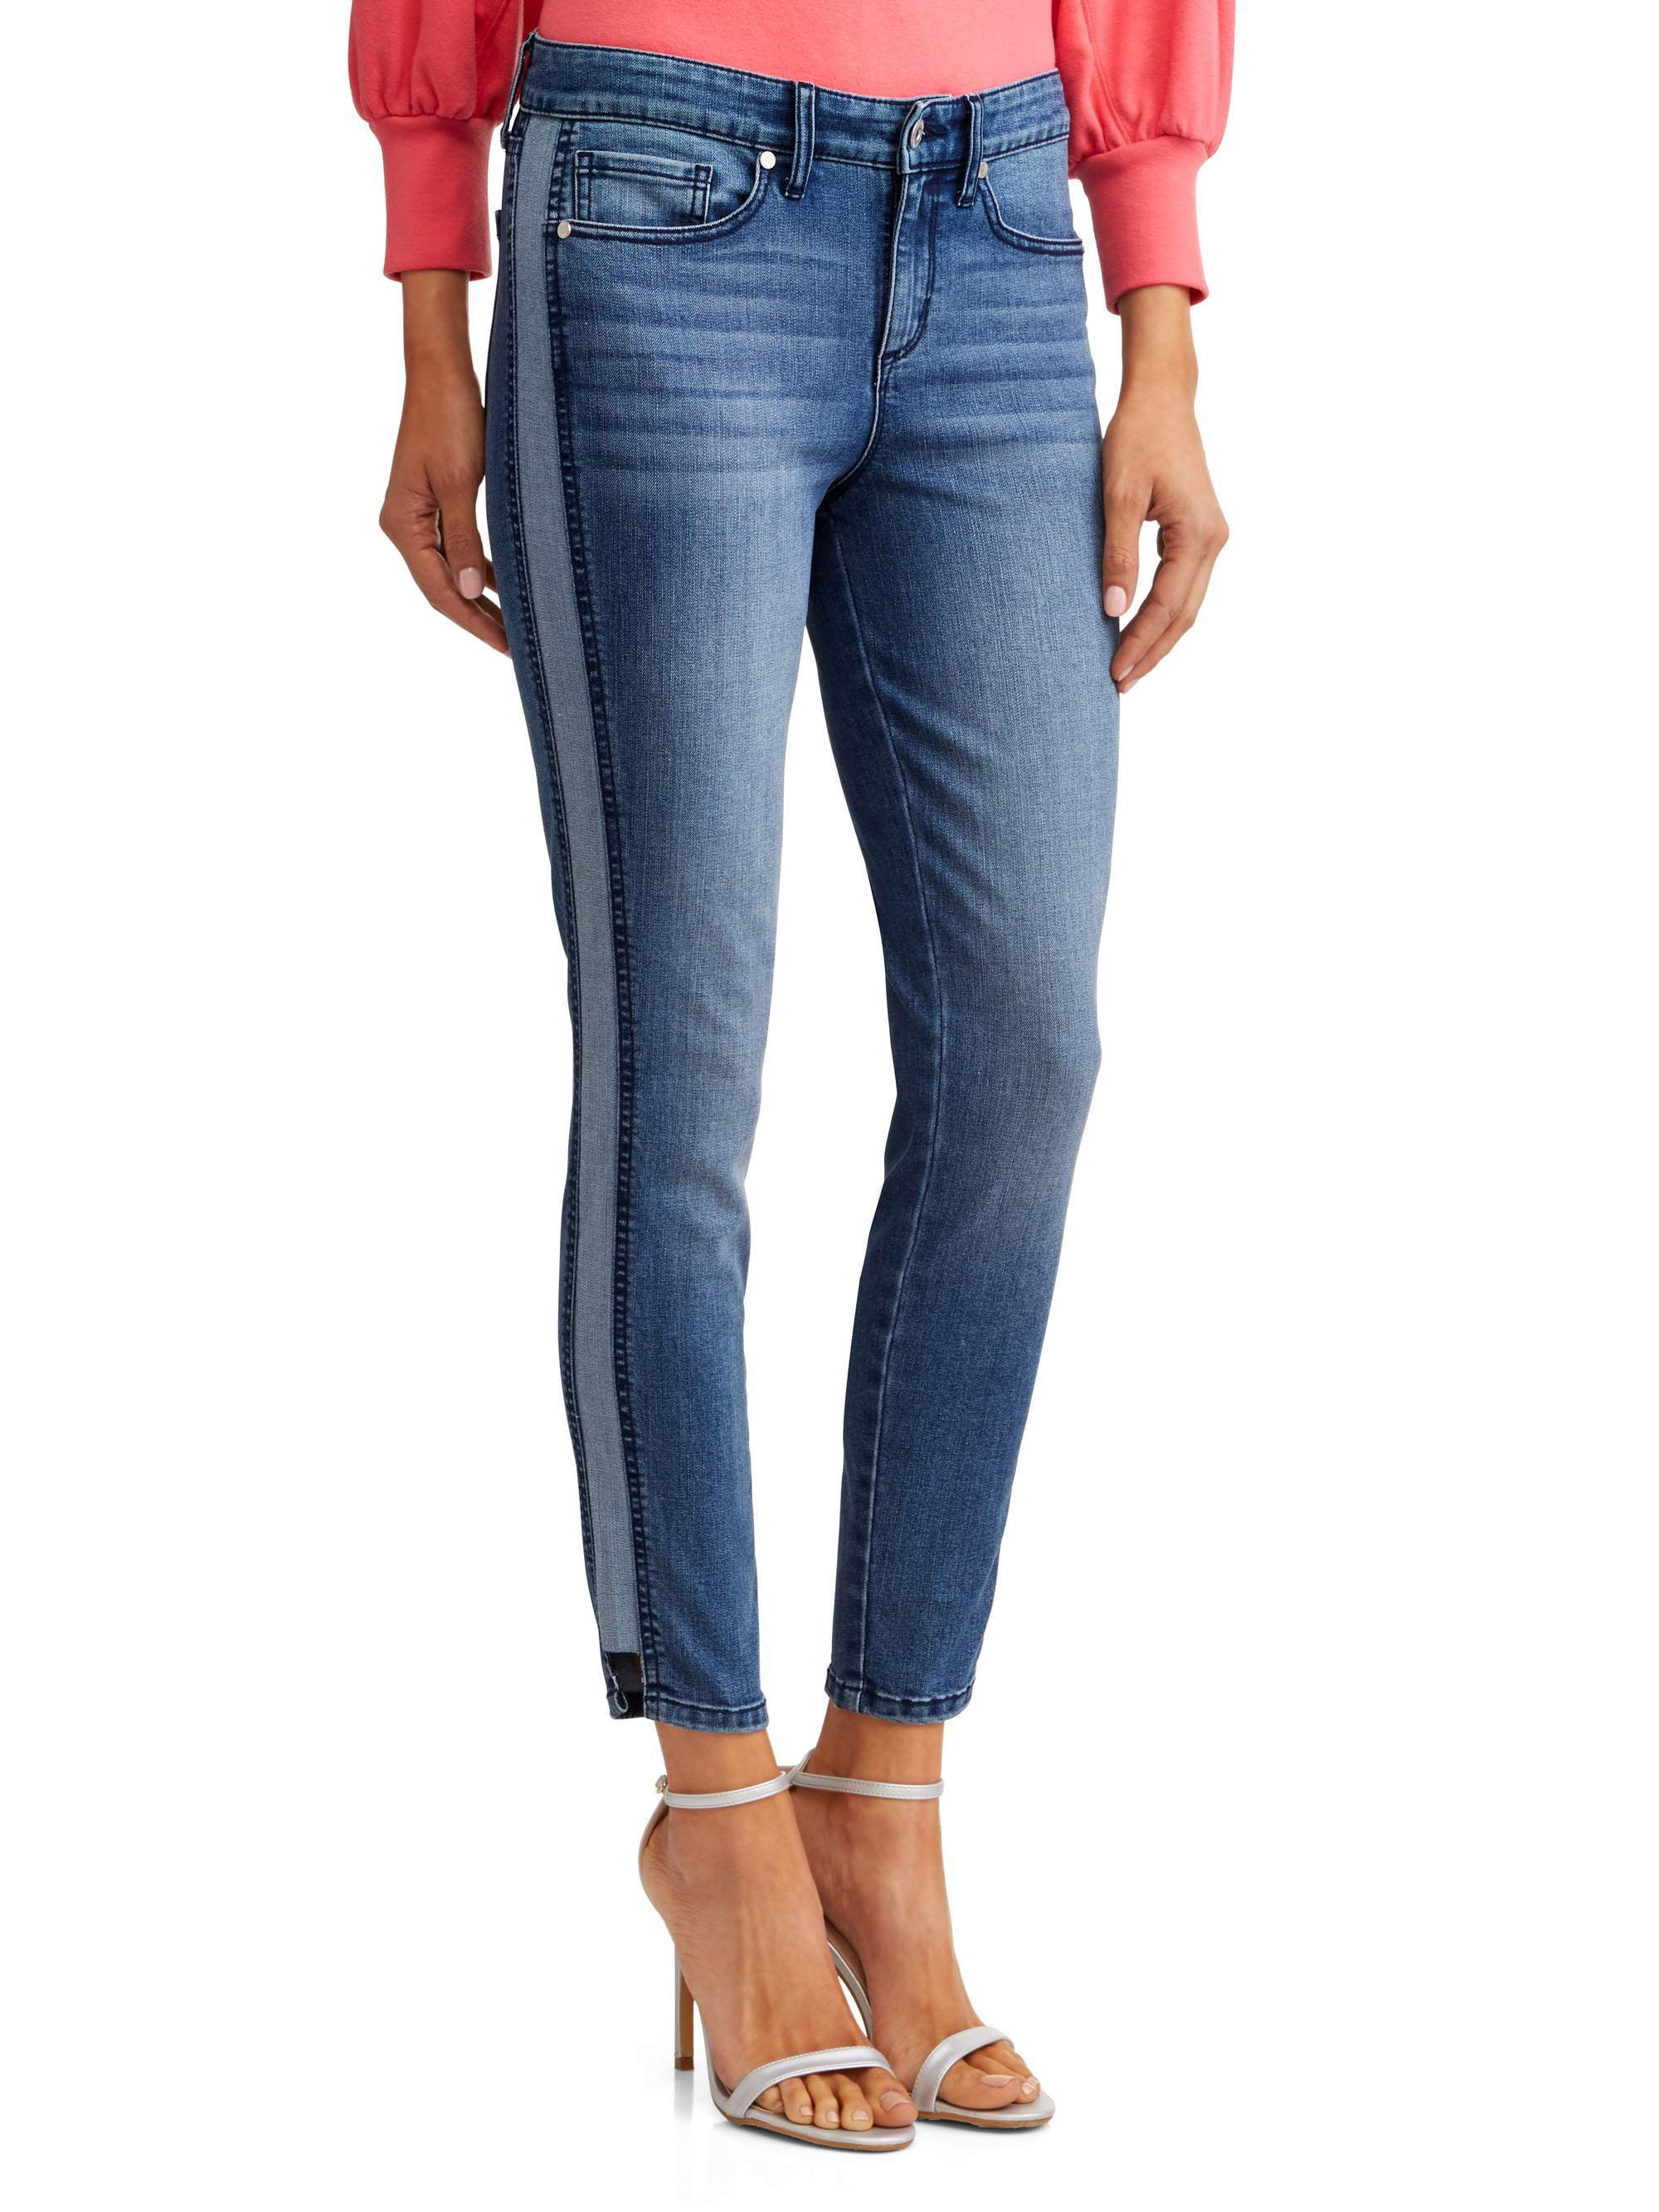 Jean With Side Stripe Top Sellers, UP TO 55% OFF | www.loop-cn.com